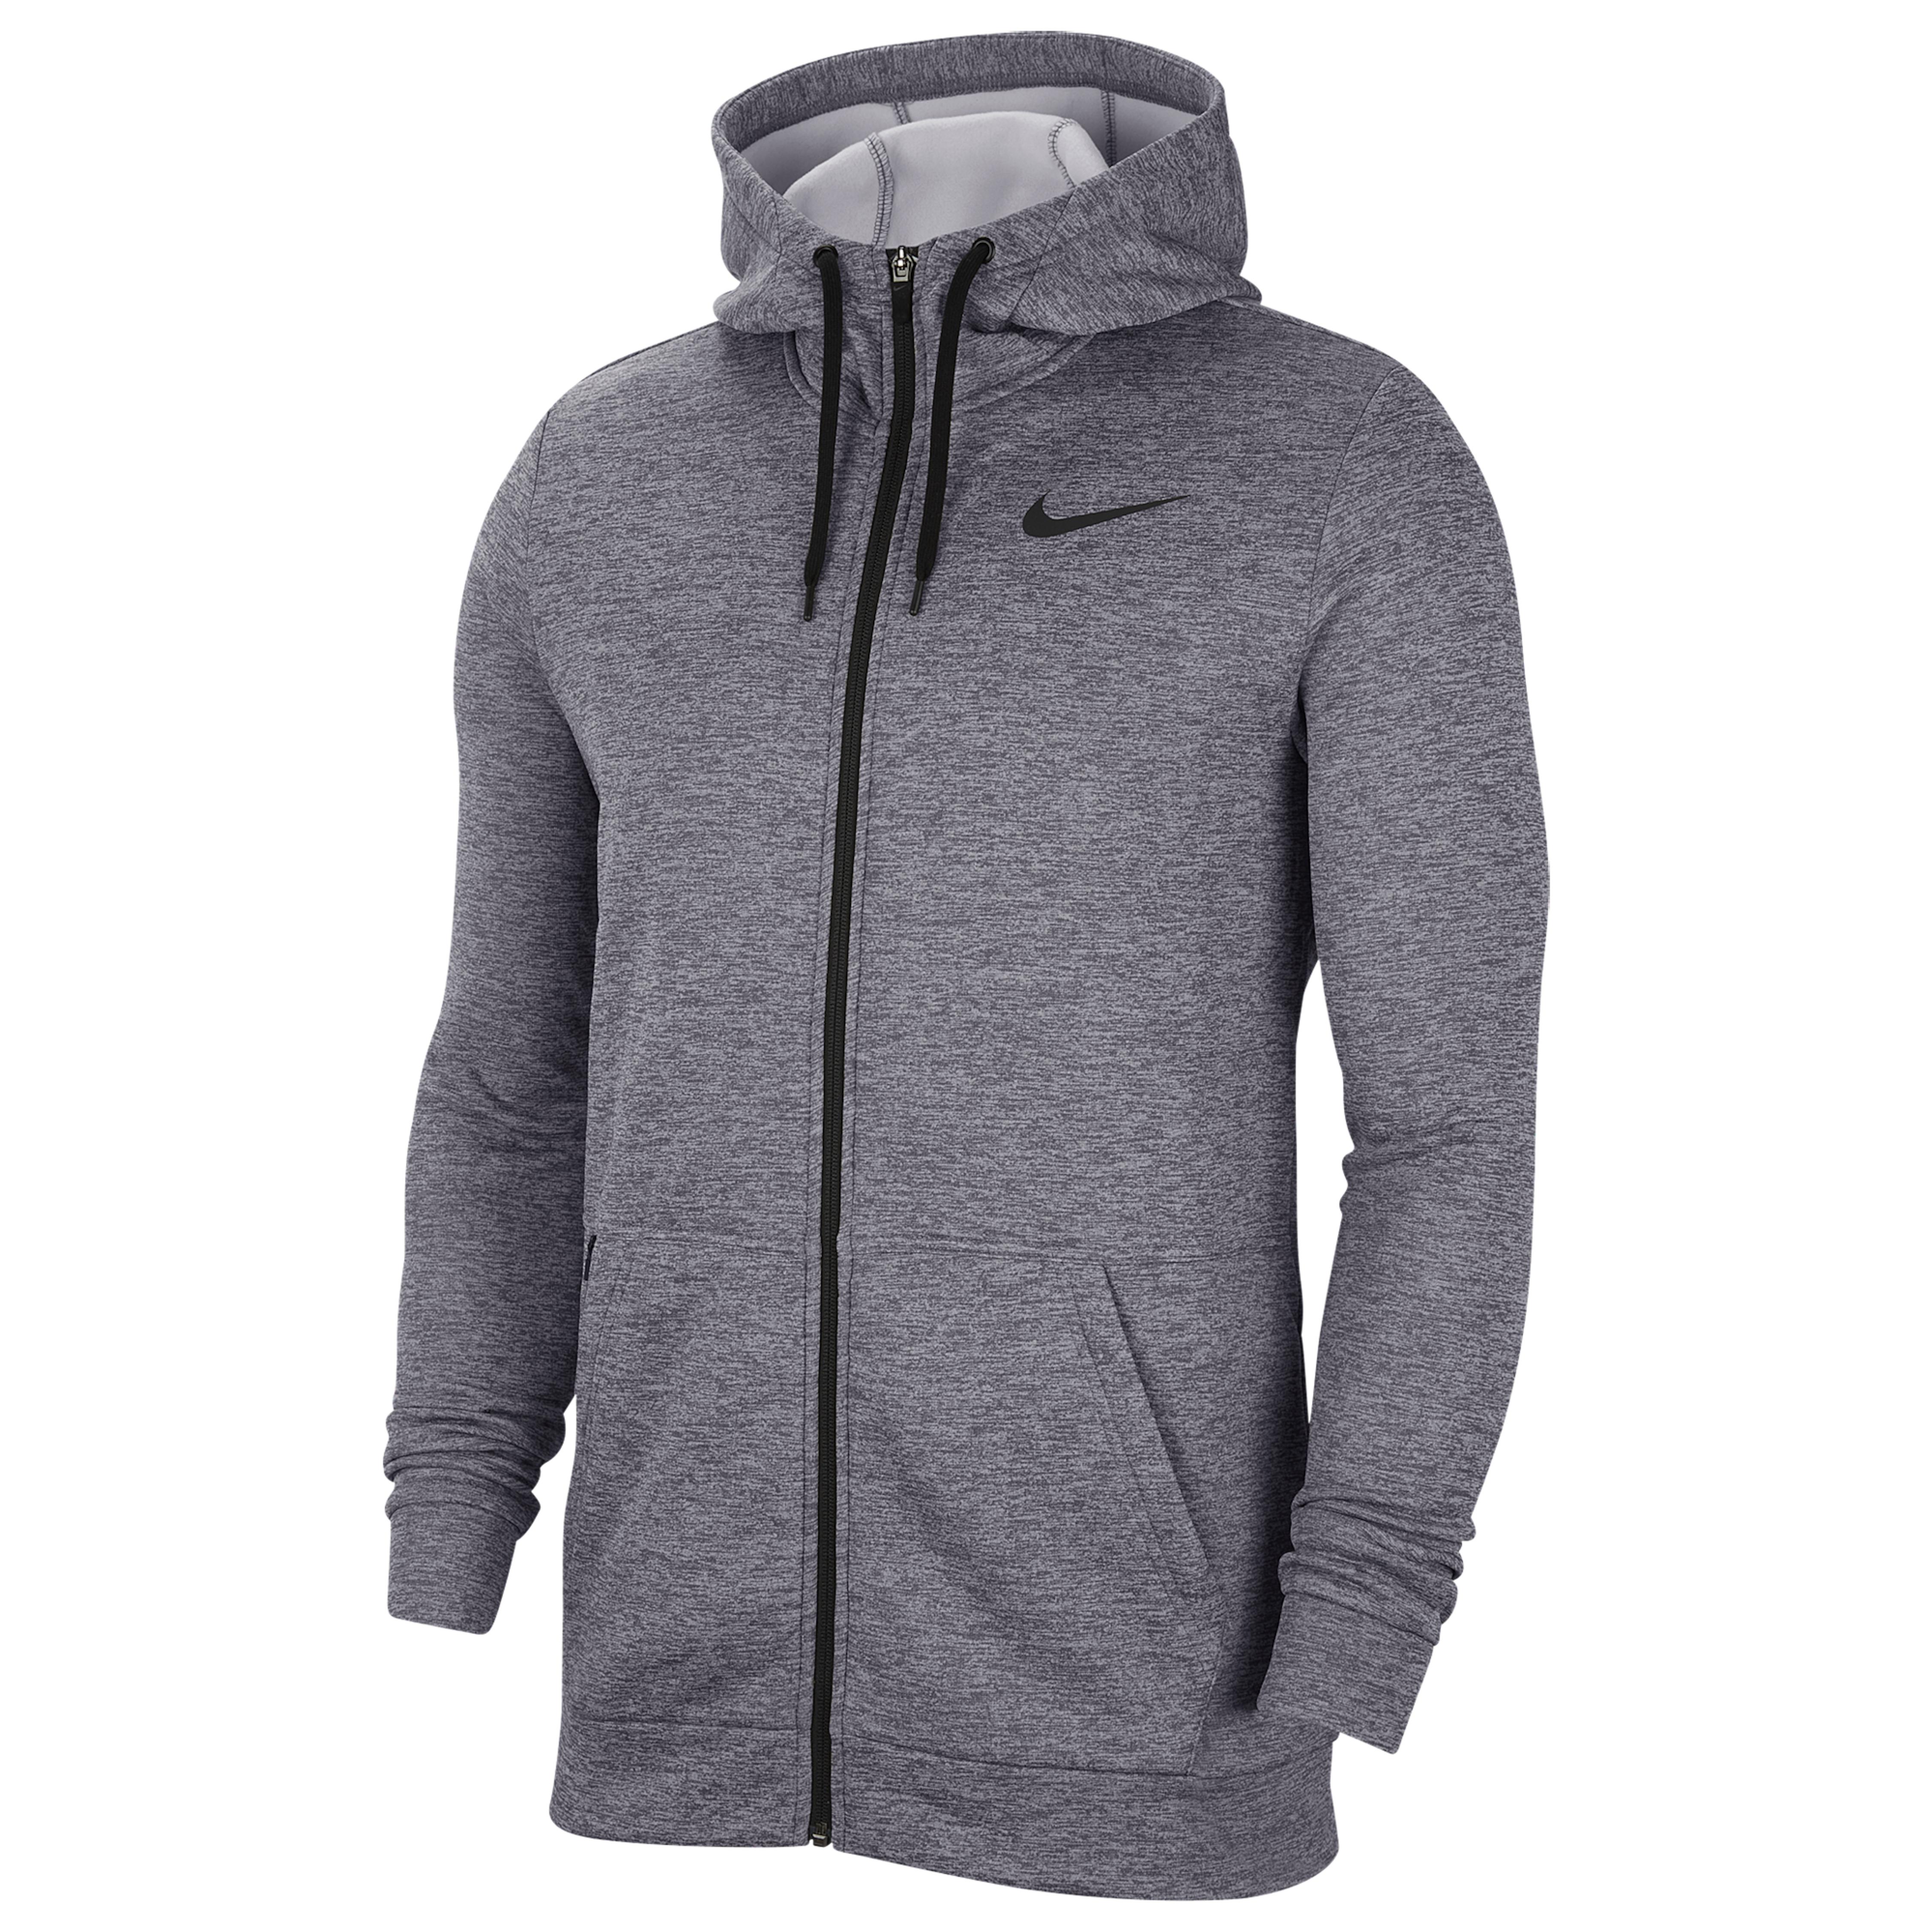 Nike Synthetic Therma Full Zip Hoodie in Charcoal Heather/Black (Gray ...